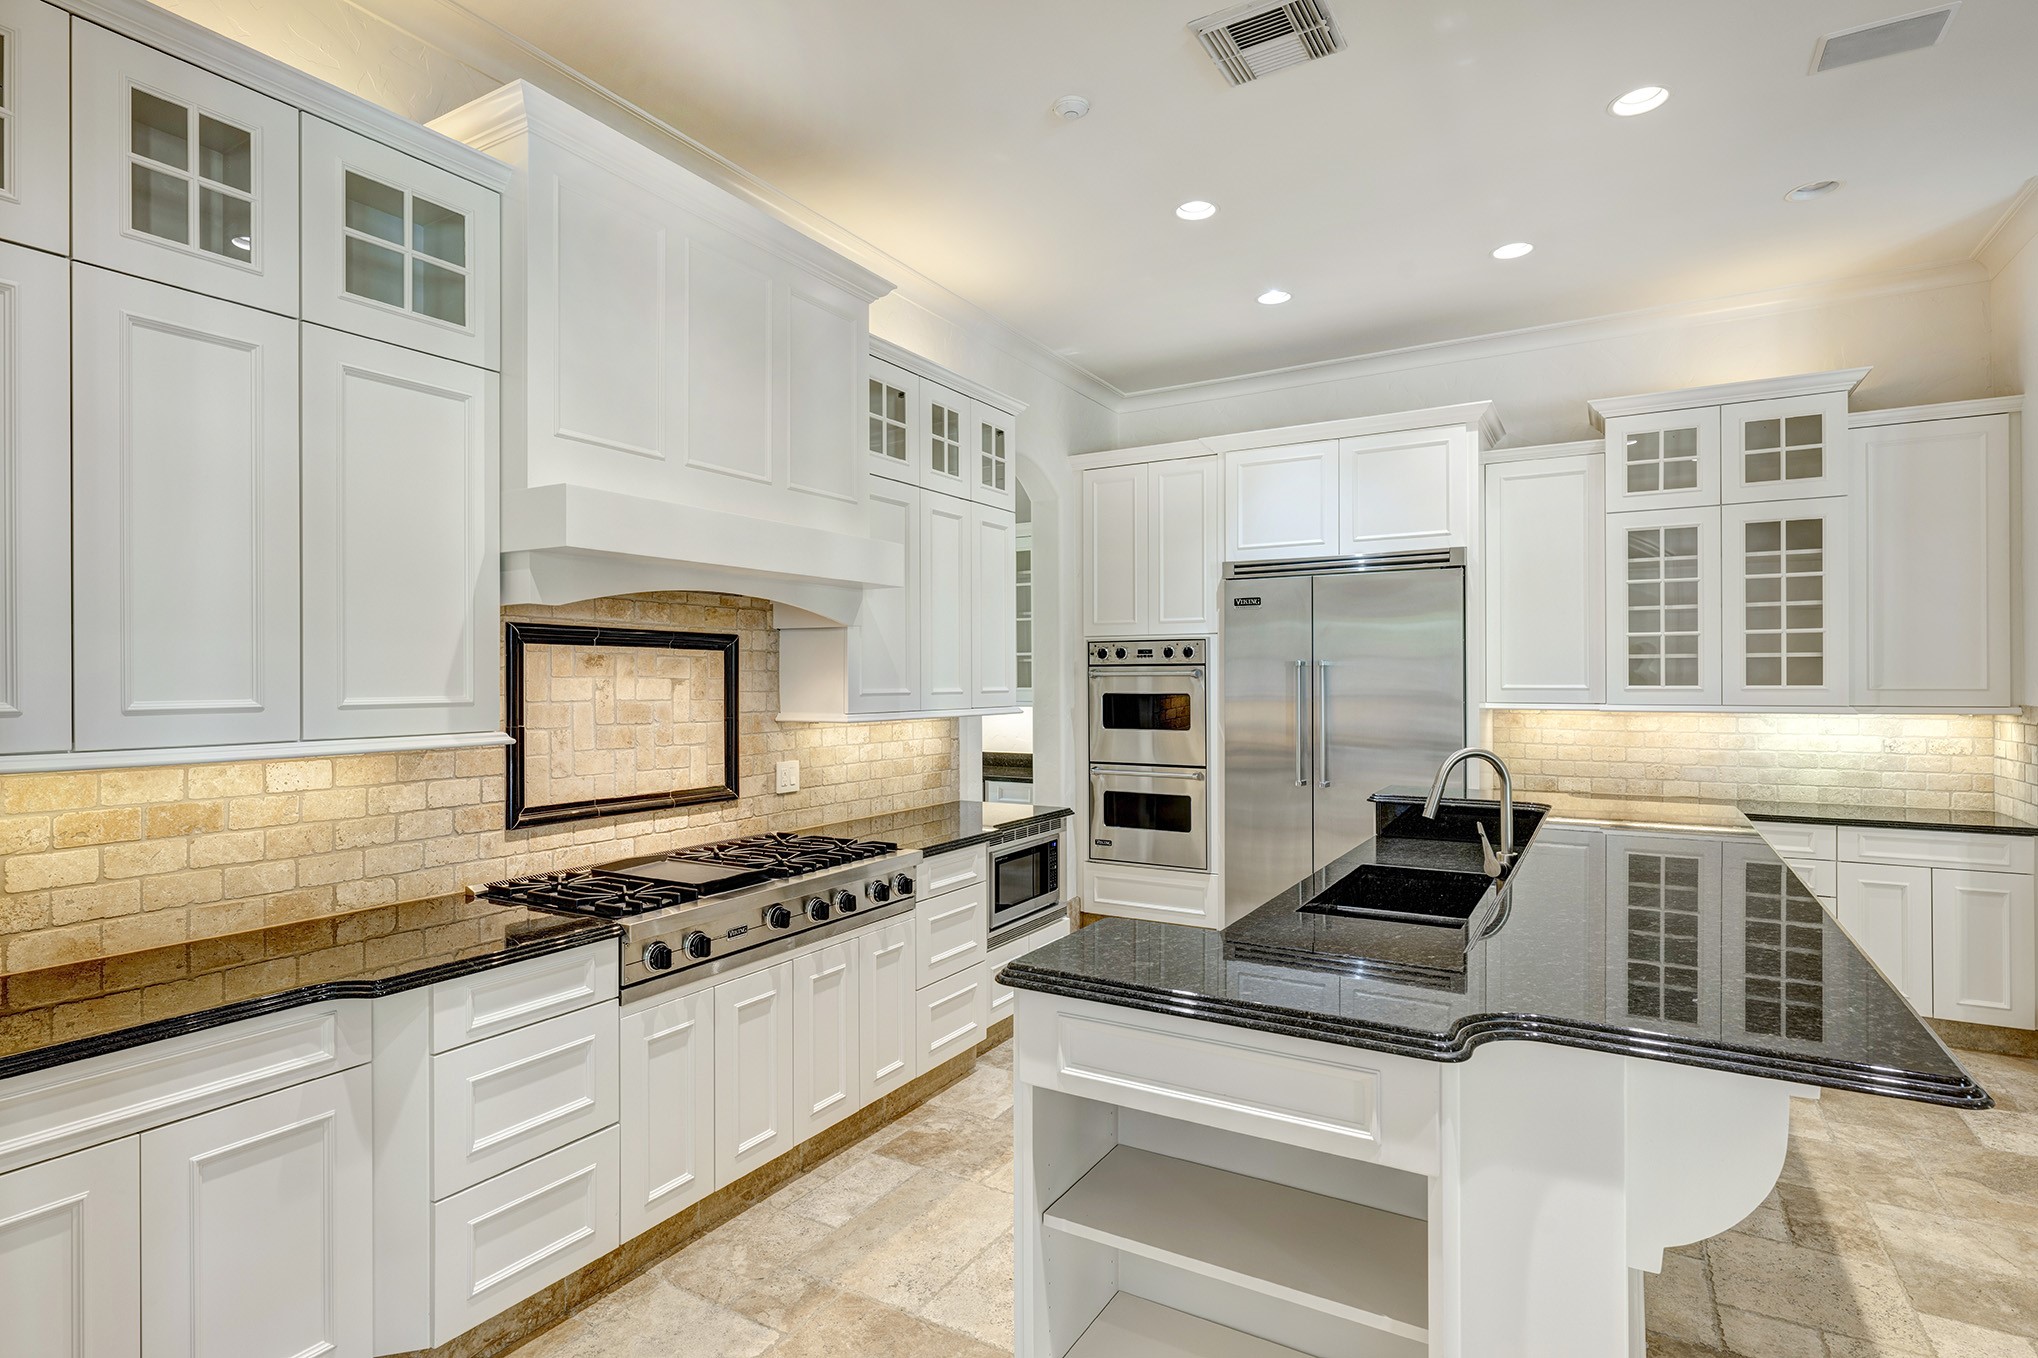 Kitchen features Viking stainless steel appliances.